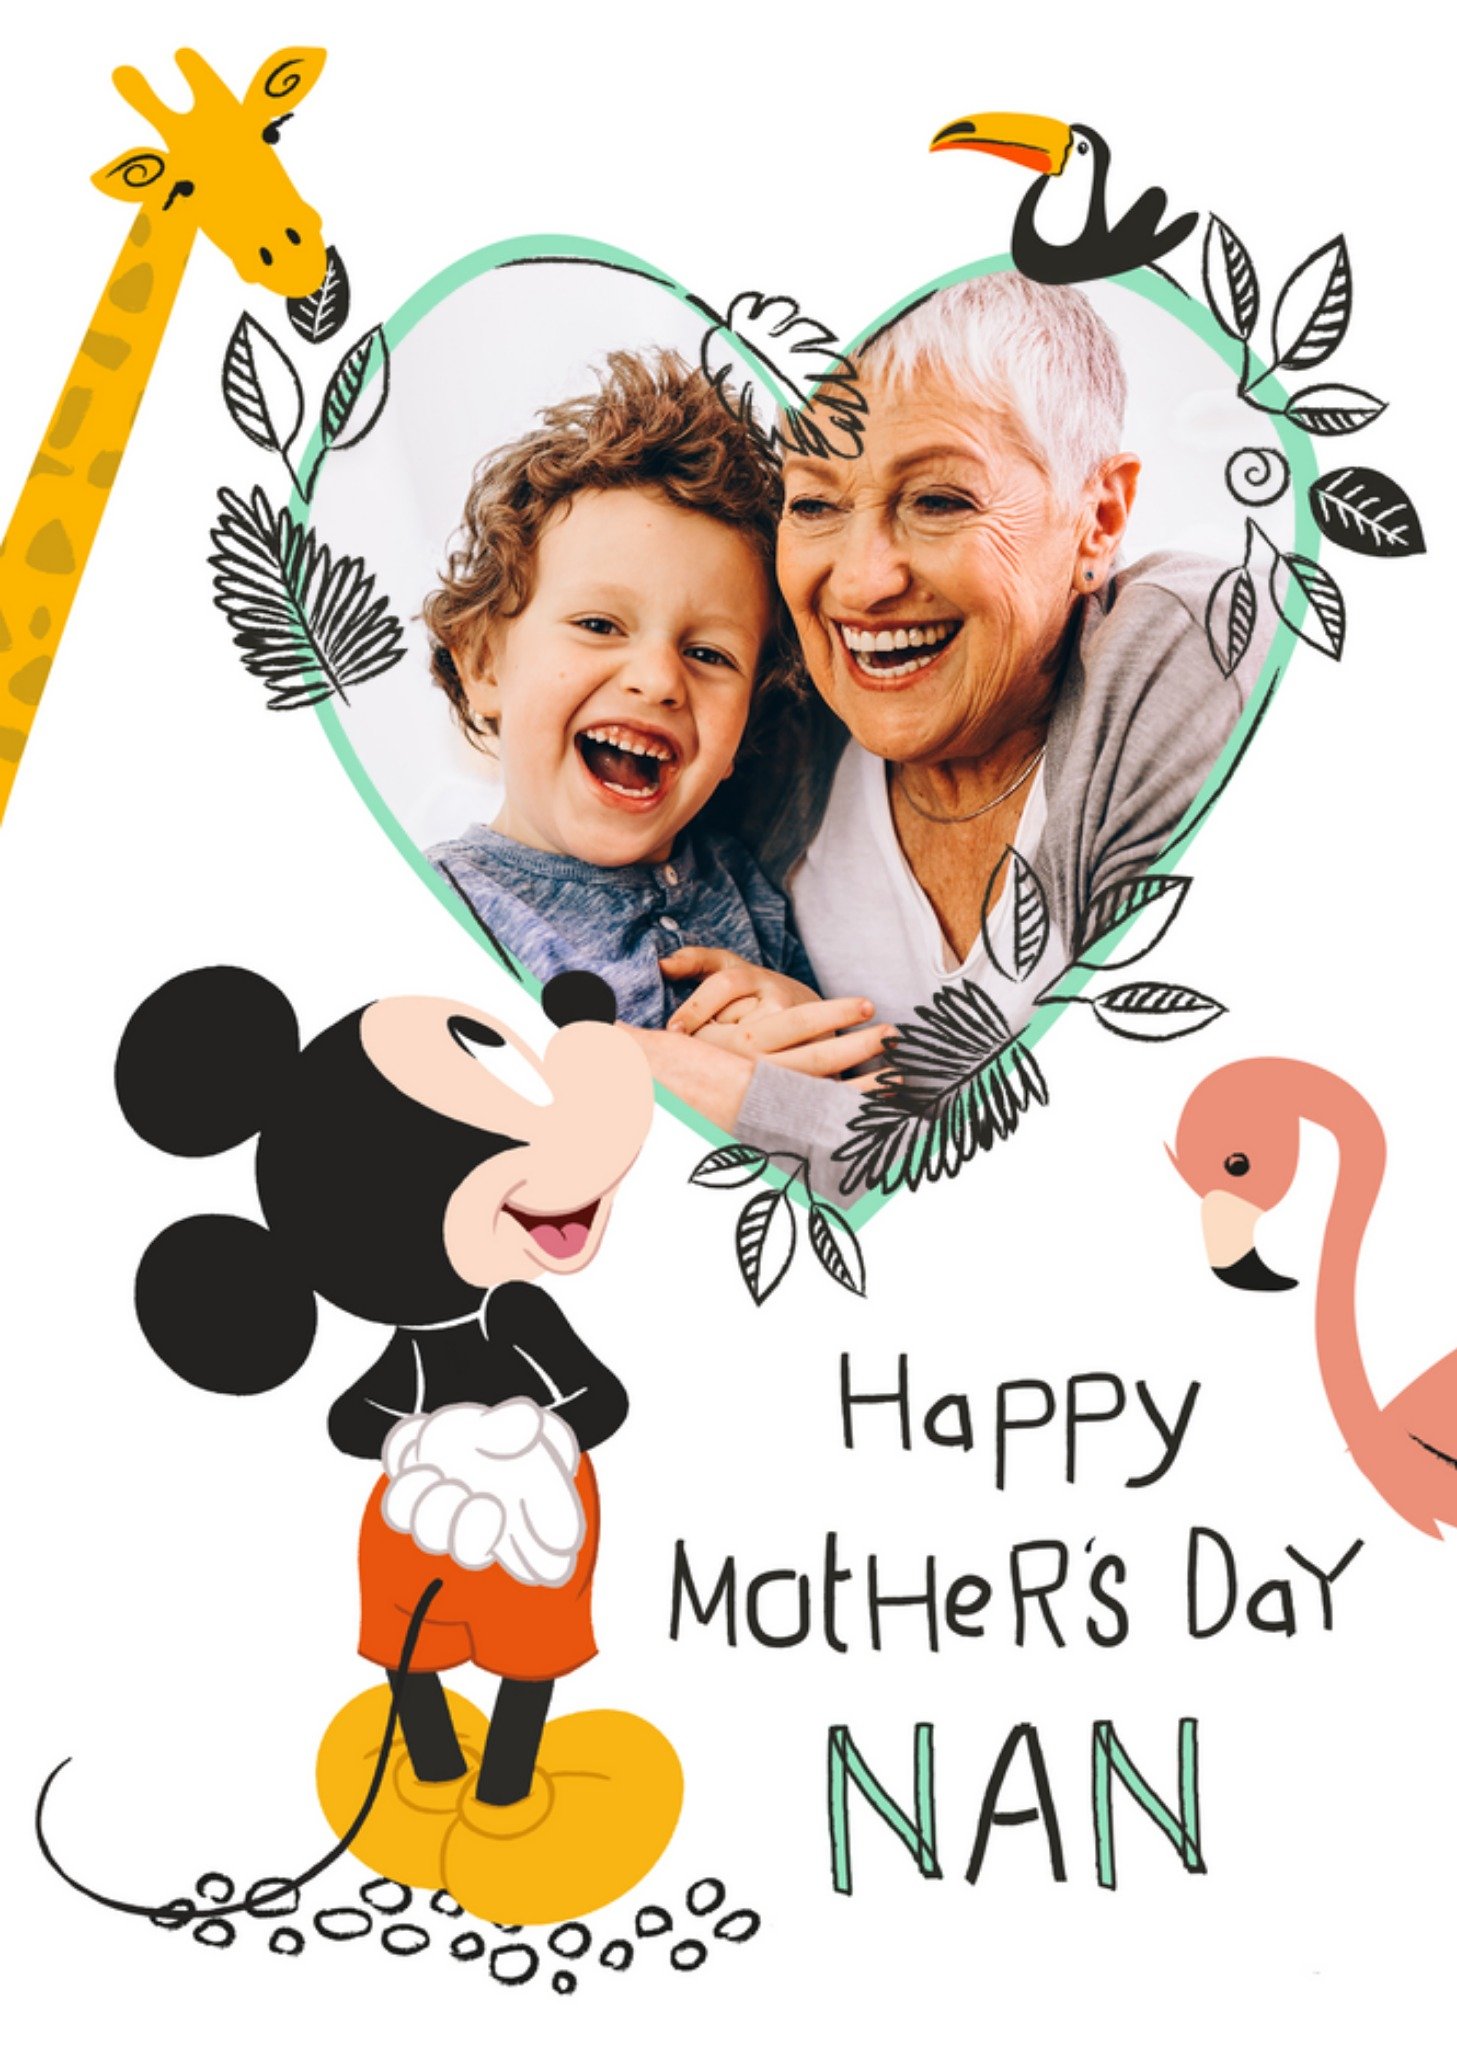 Disney Mickey Mouse Happy Mothers Day Nan Card Ecard